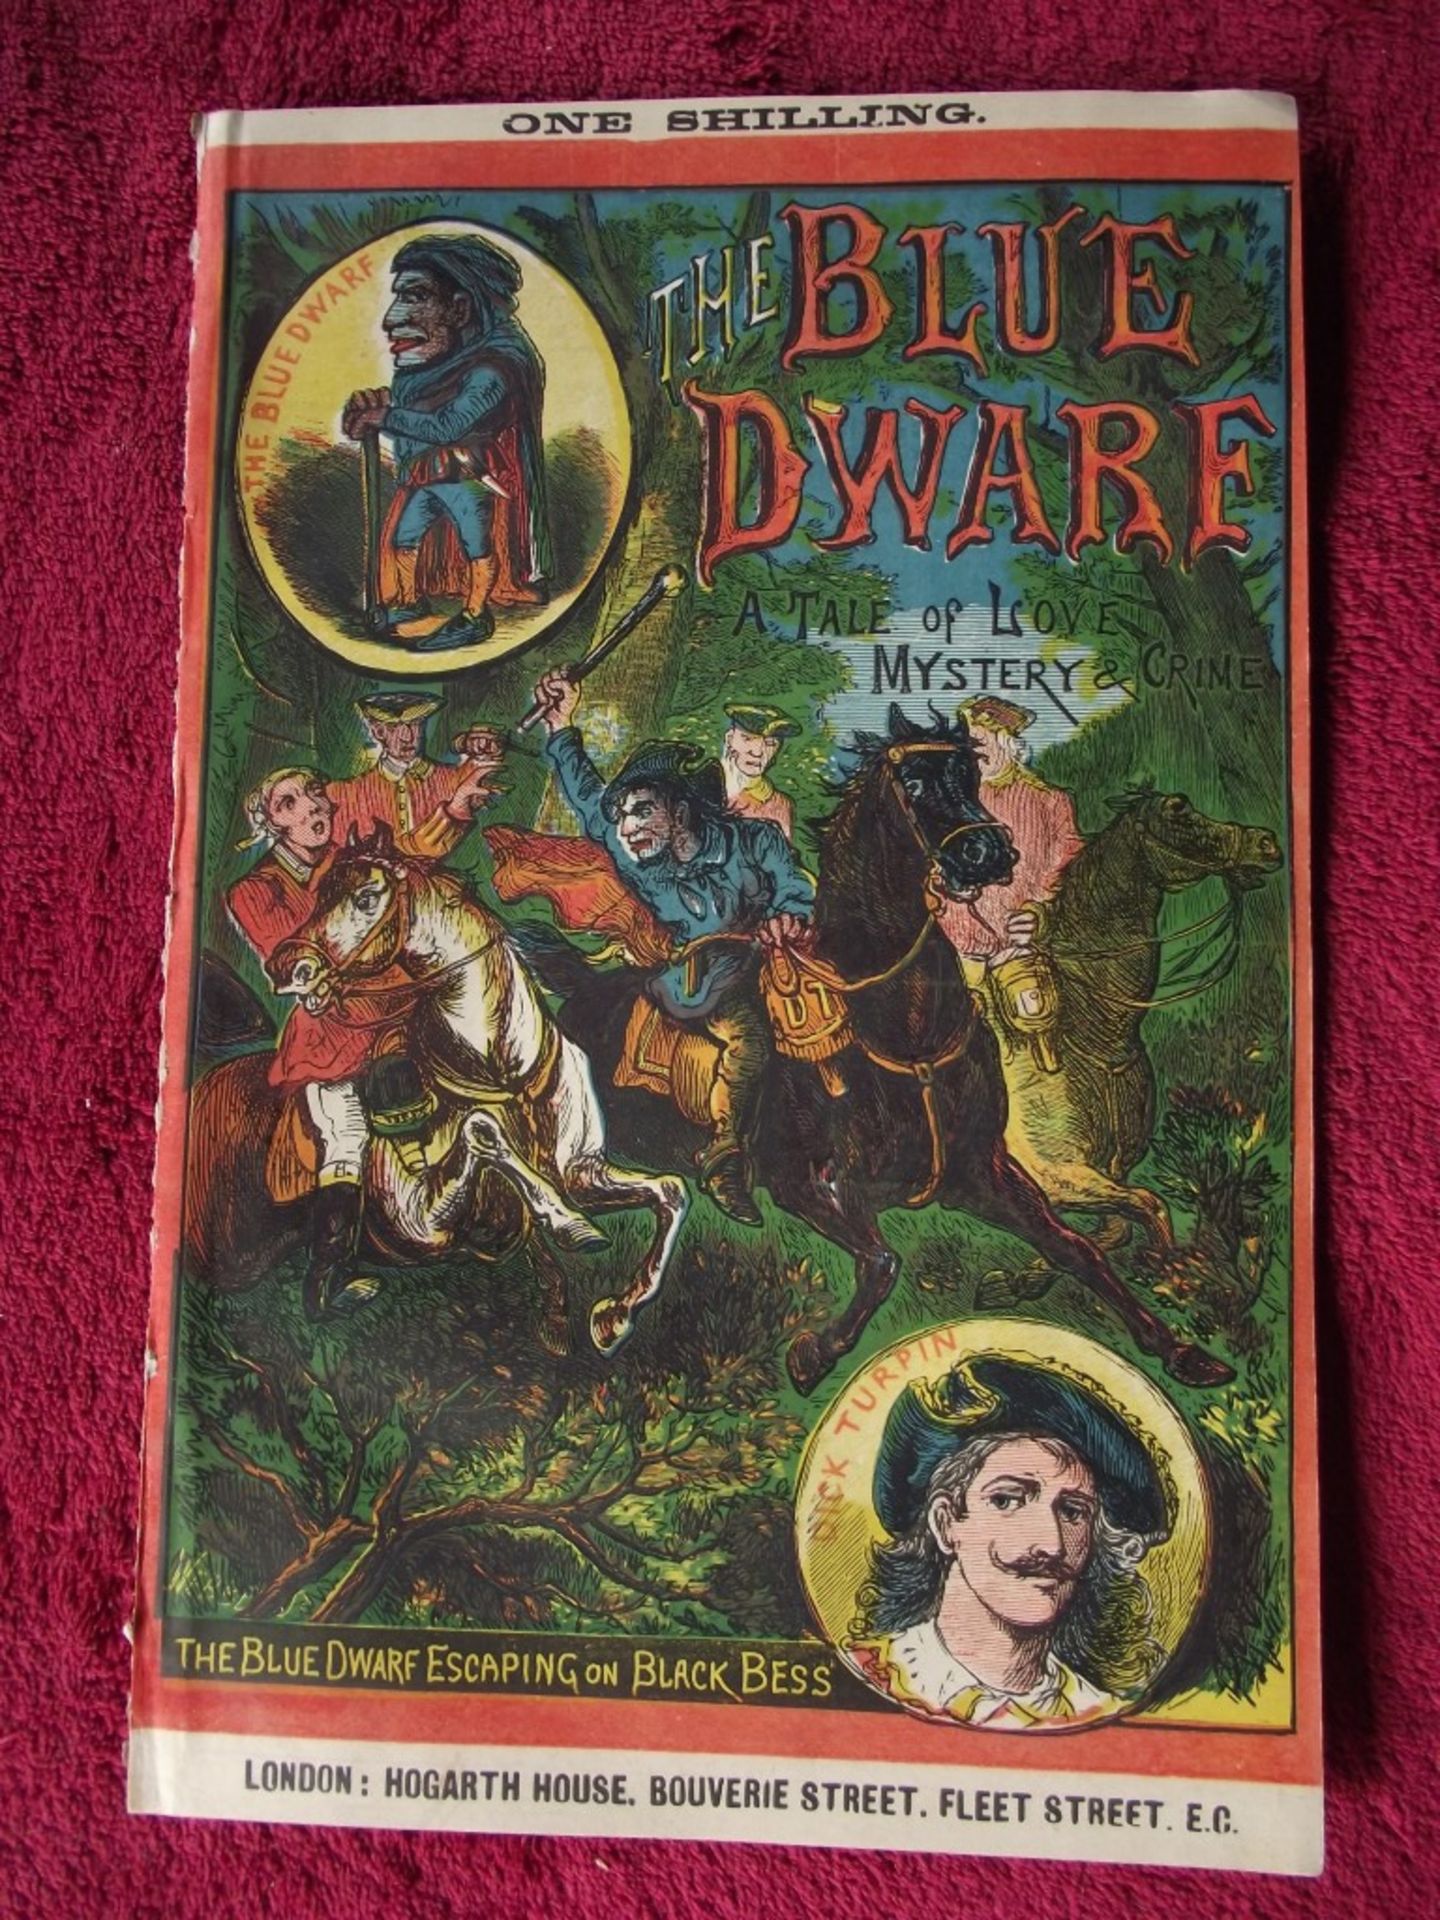 16 x Lithographic Prints From The Blue Dwarf - Percy B. St John - + 14 Prints - Circa 1880's - Image 37 of 39